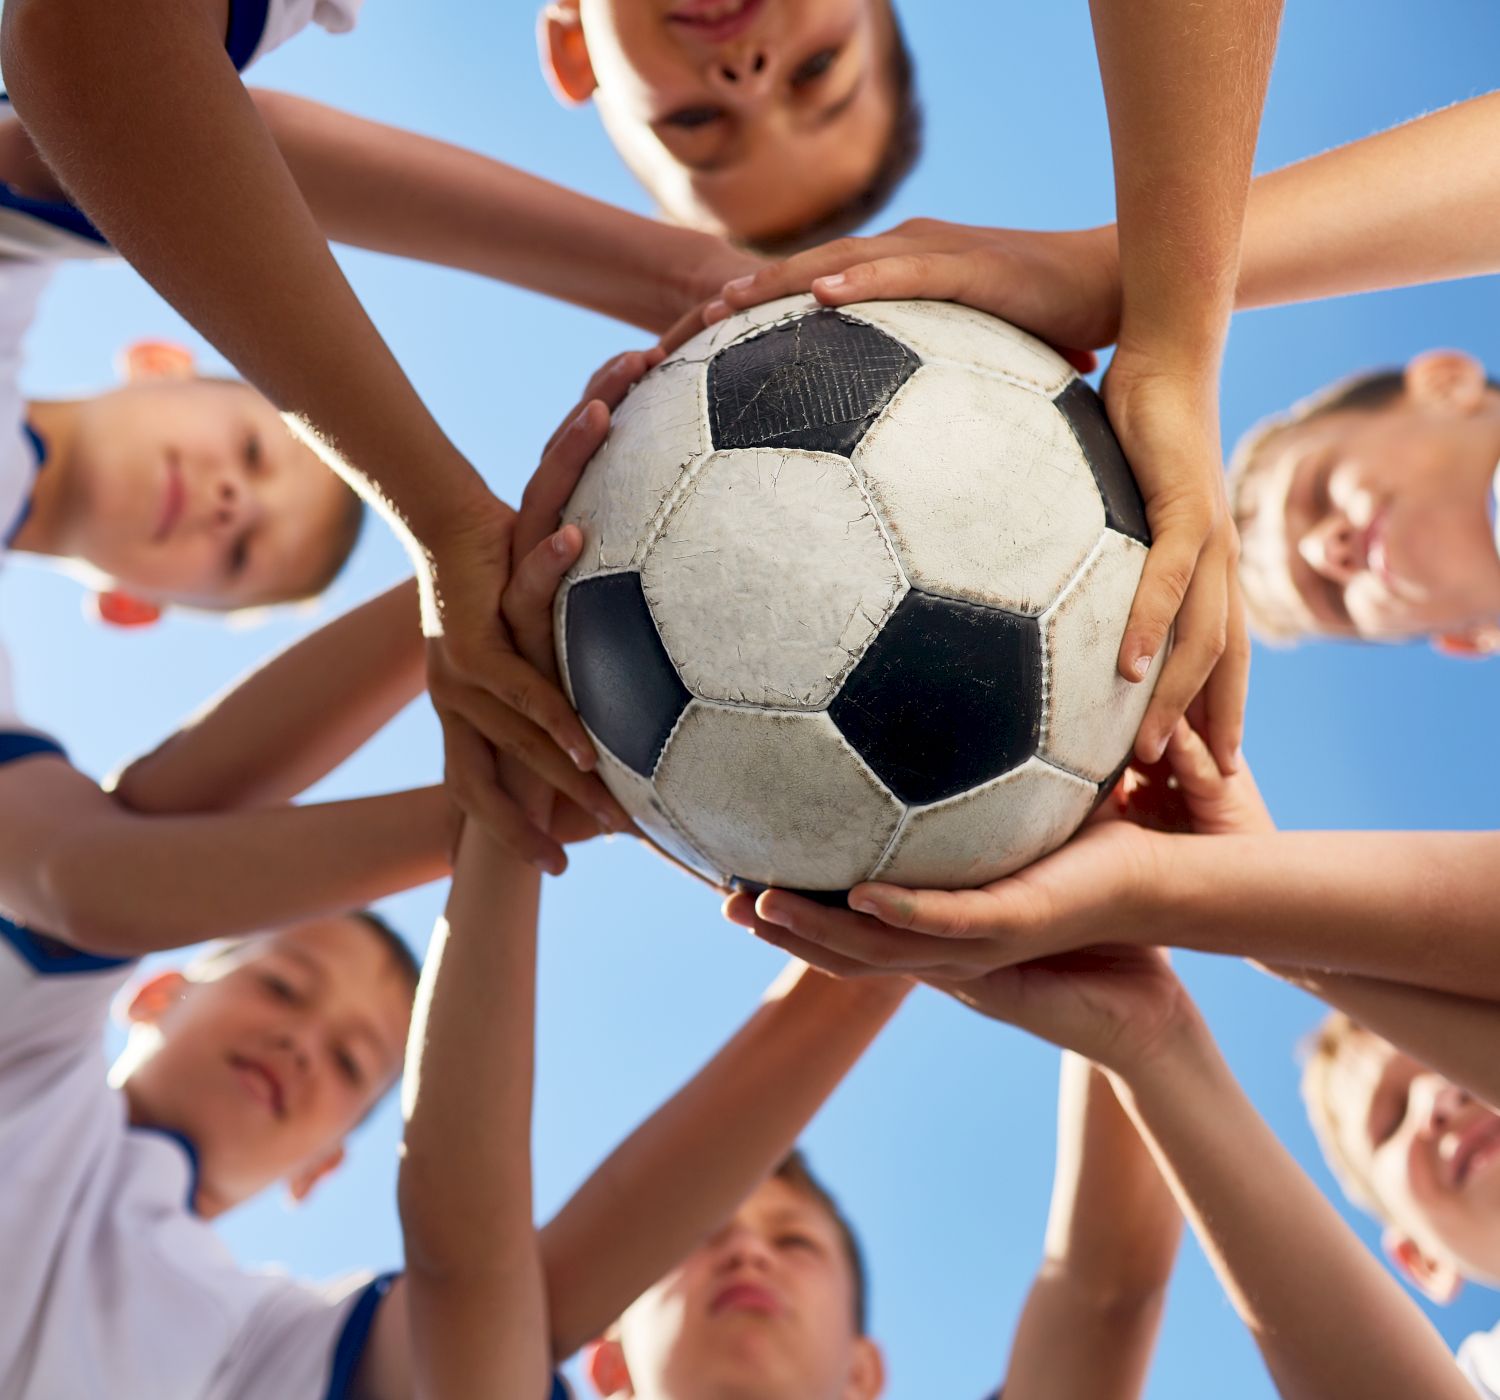 A group of boys in white shirts form a circle, each with one hand holding a soccer ball in the center, viewed from below against a blue sky.